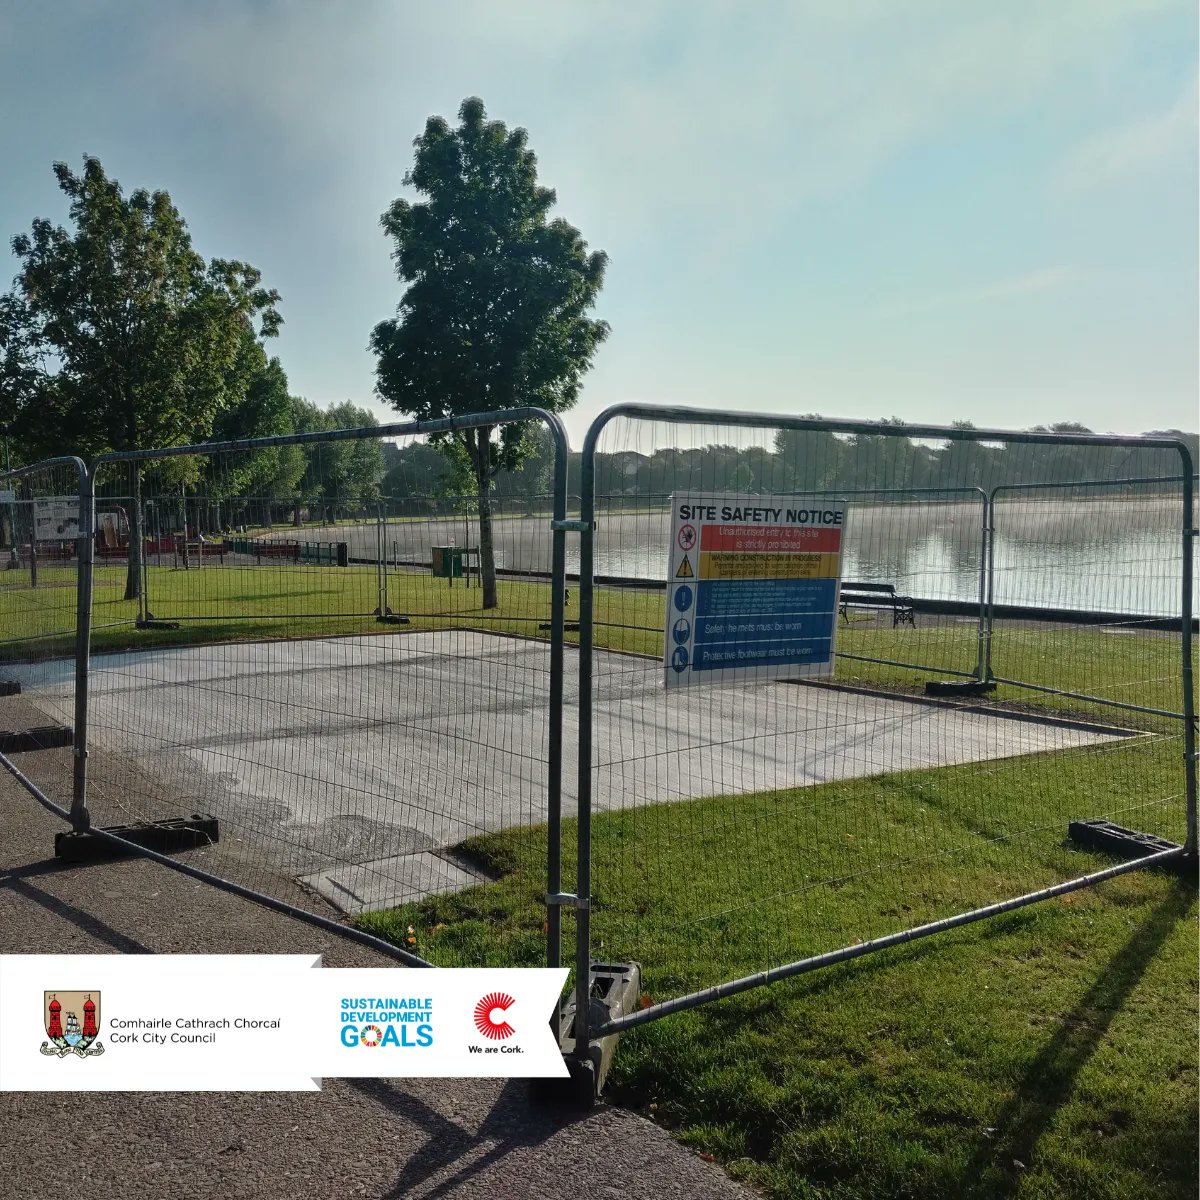 📣 New Outdoor Gym 📣 🚧 Work has commenced on the brand-new outdoor gym located at The Lough. ➡️ We look forward to adding this amenity in the coming weeks. #Cork #Outdoorgym #exercise